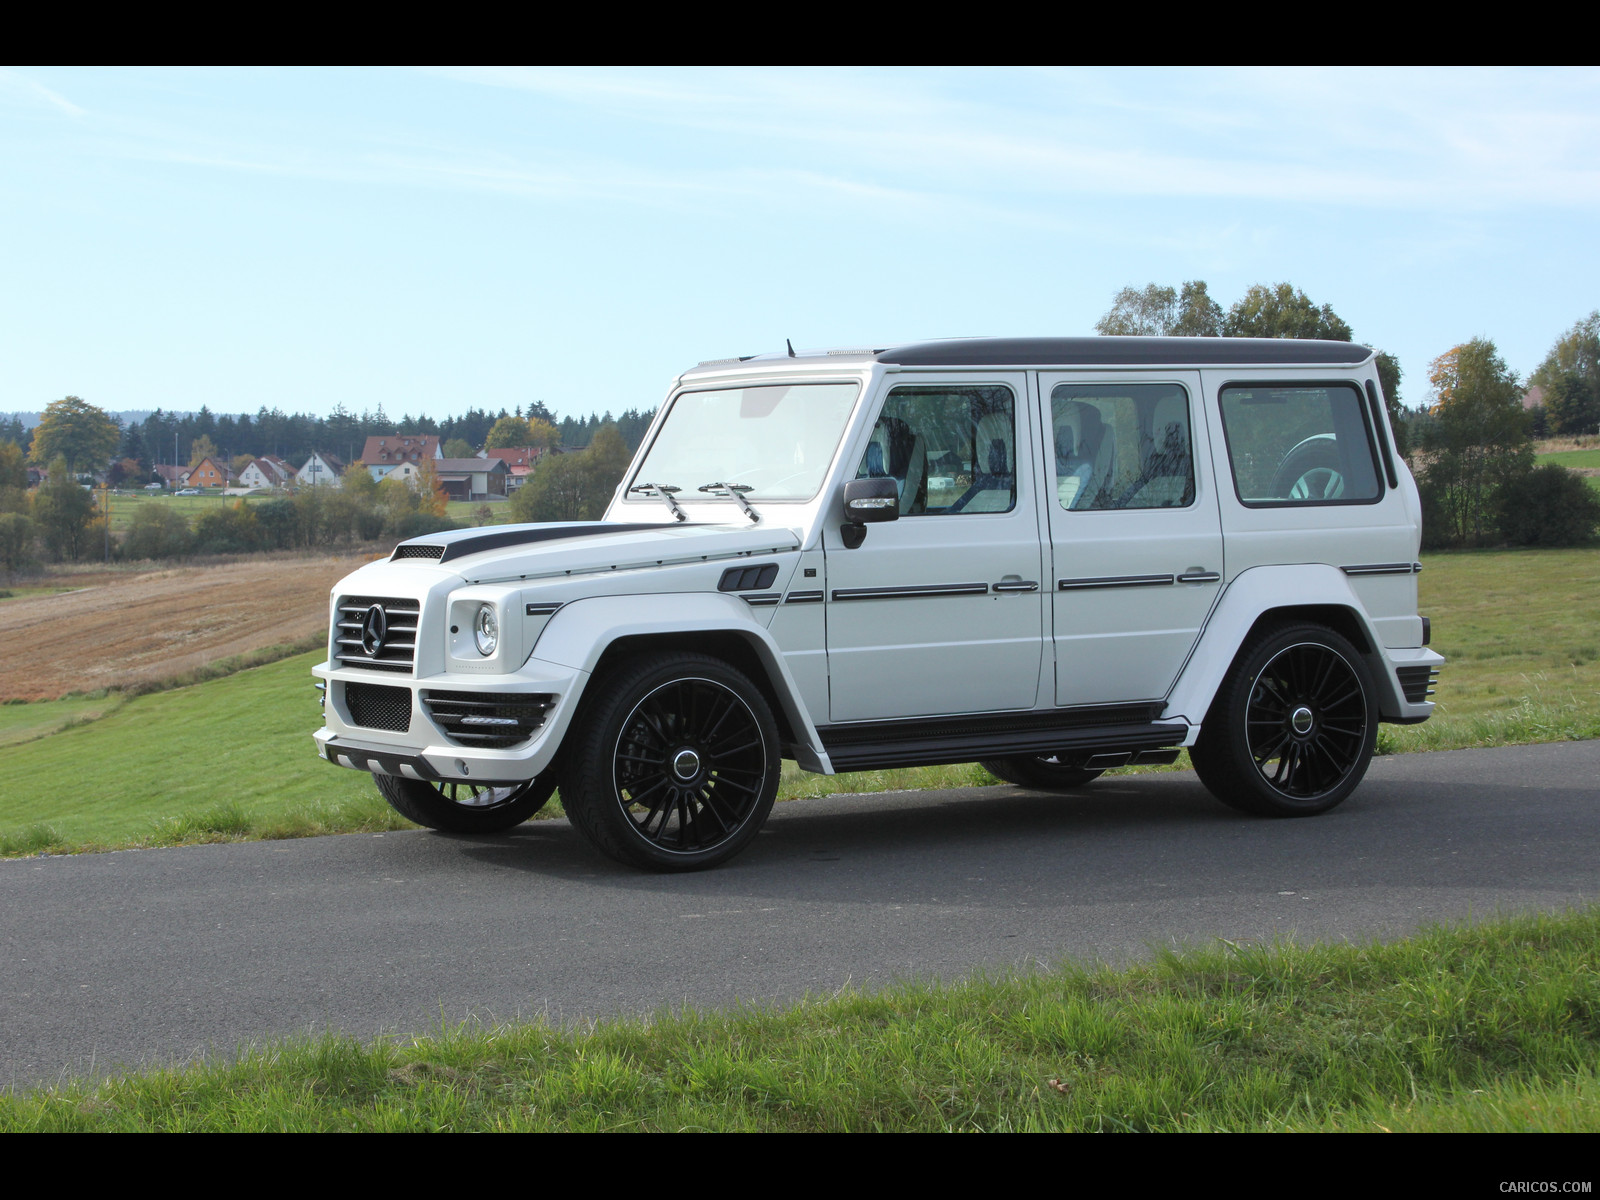 Mansory G-Couture based on Mercedes G-Class White - Side, #28 of 39